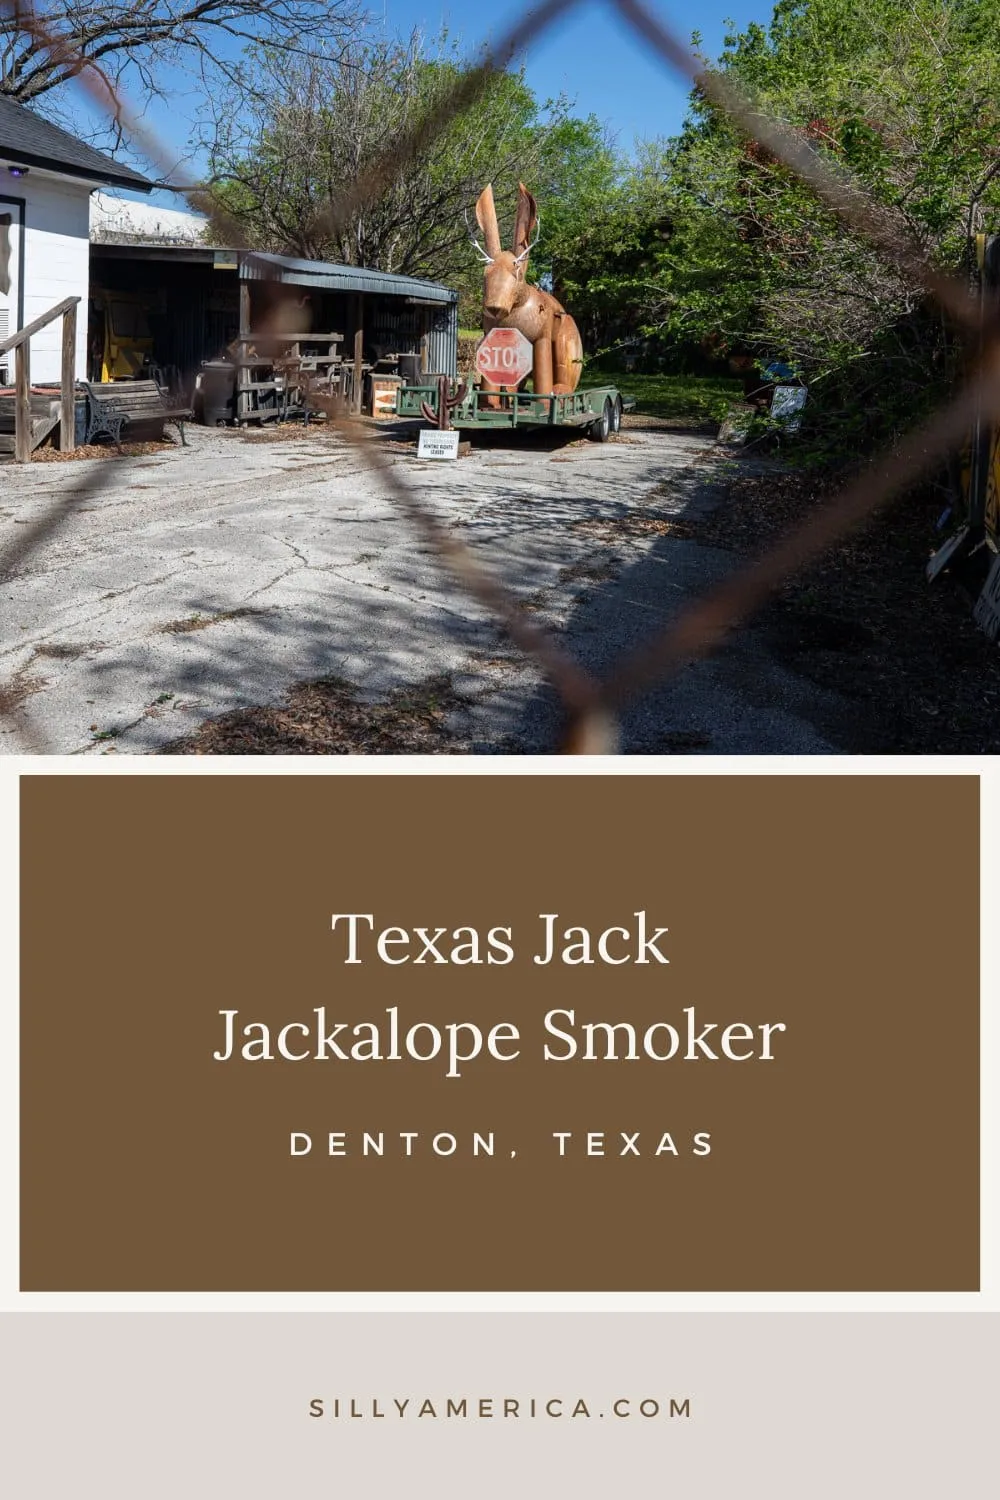 A Texas legend meets a great Texas pastime at this fun roadside attraction. Meet Texas Jack, a jackalope-shaped smoker in Denton, Texas. Visit this weird roadside attraction on your Texas road trip. The jackalope smoker is a fun stop to add to your travel itinerary! #RoadsideAttraction #RoadsideAttractions #Texas RoadsideAttraction #Texas #DentonTexas #RoadTrip #RoadTrips #TexasRoadTrip #RoadTripStop #RoadTripStops